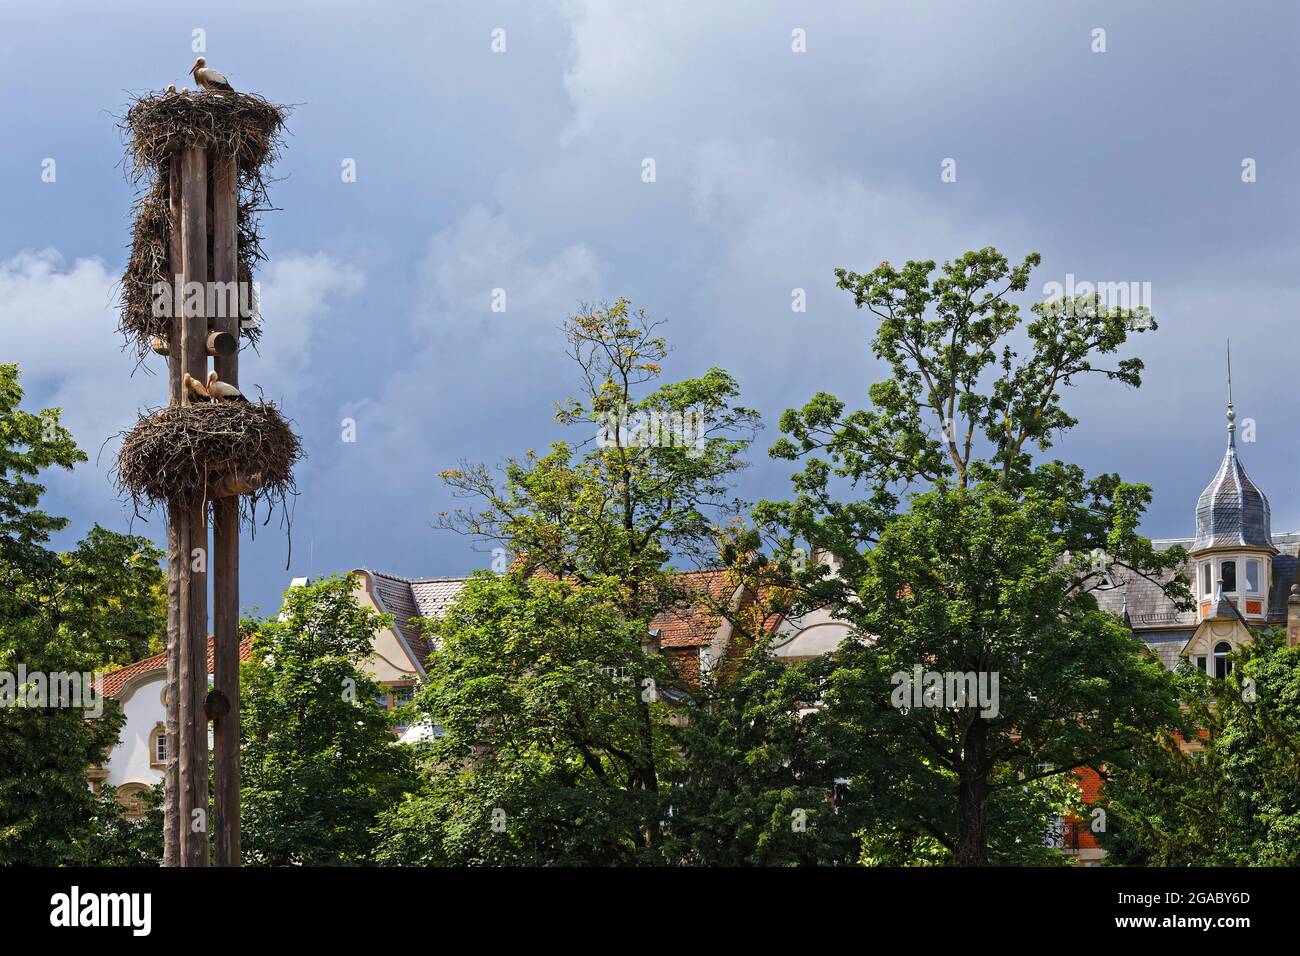 Storks and their nest in Strasbourg. Storks are symbol of Alsace region. Stock Photo